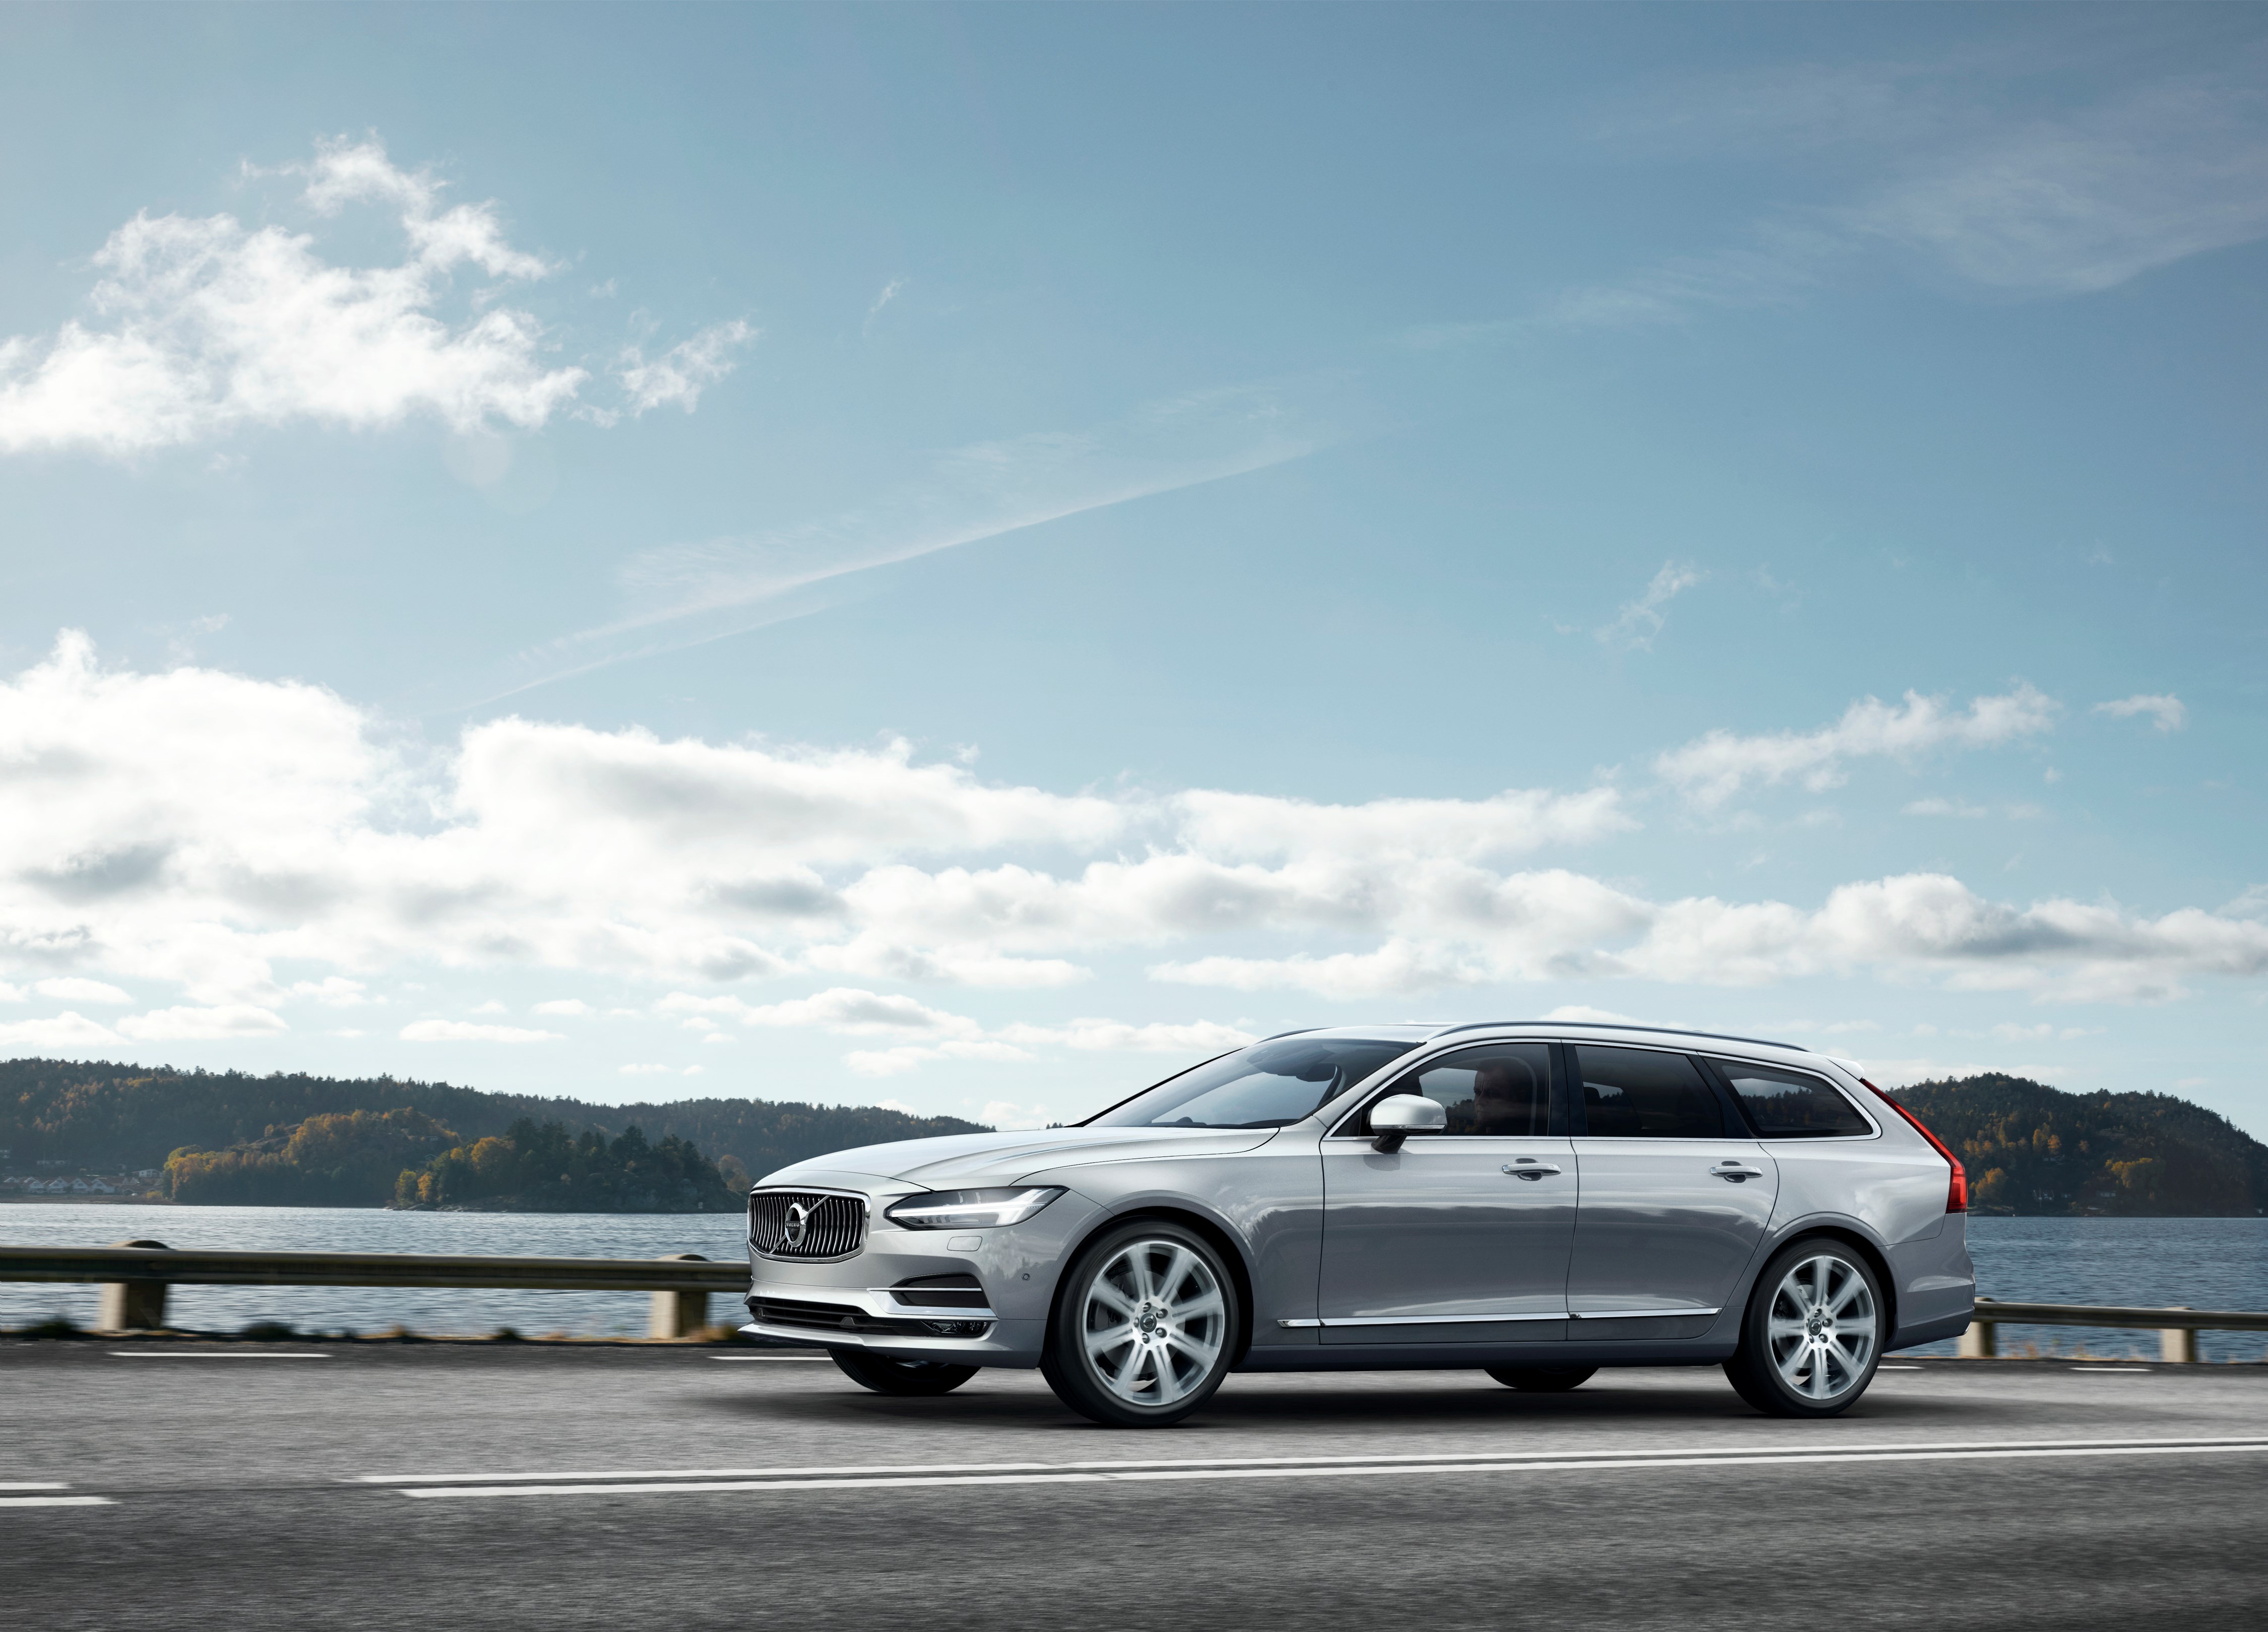 Volvo's V90 is packed with high-tech features